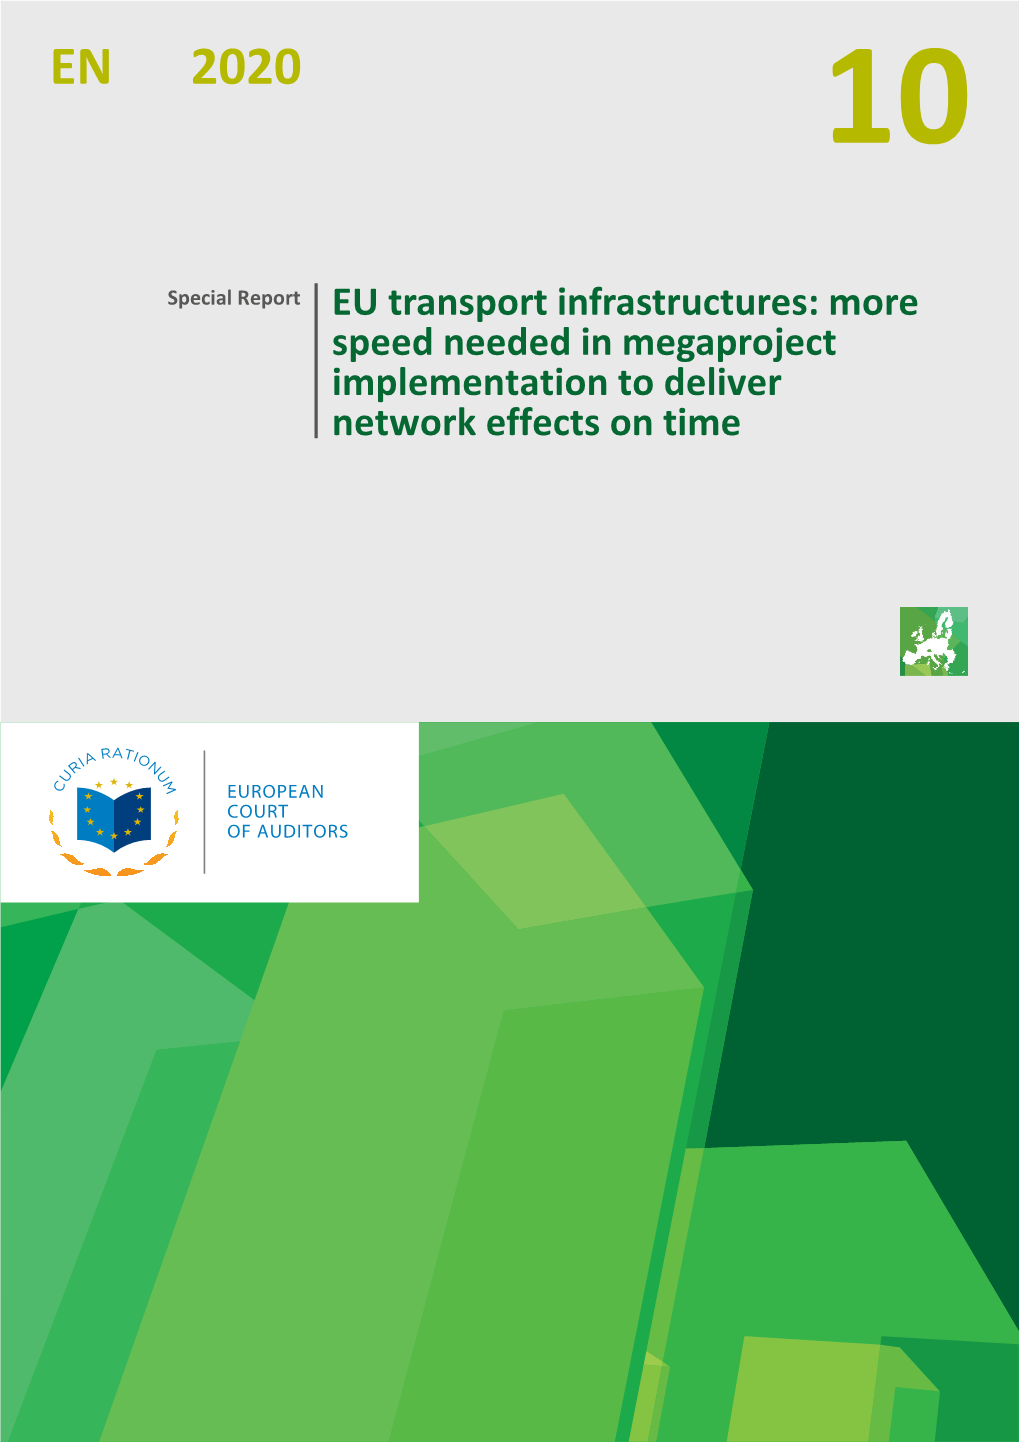 EU Transport Infrastructures: More Speed Needed in Megaproject Implementation to Deliver Network Effects on Time 2